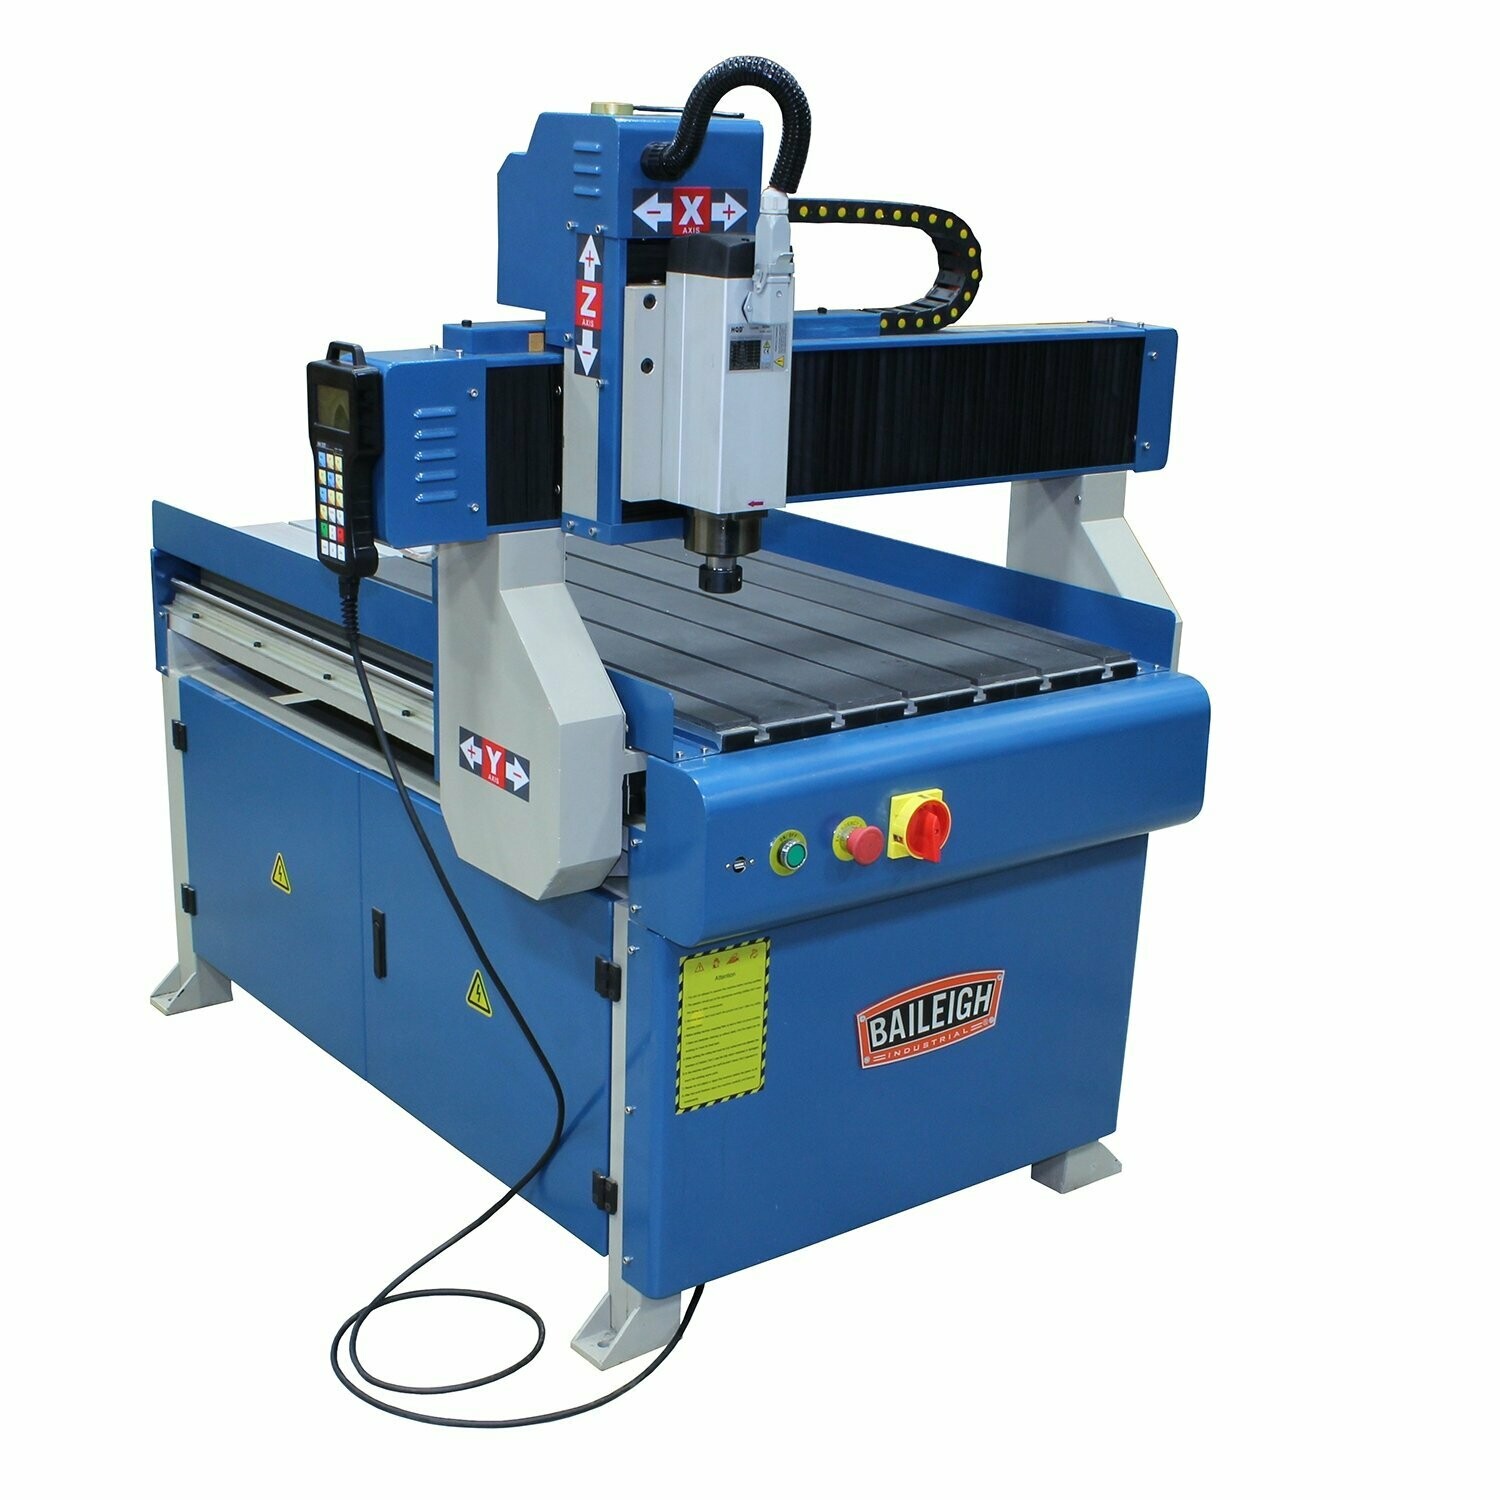 Baileigh WR32 CNC Router Table